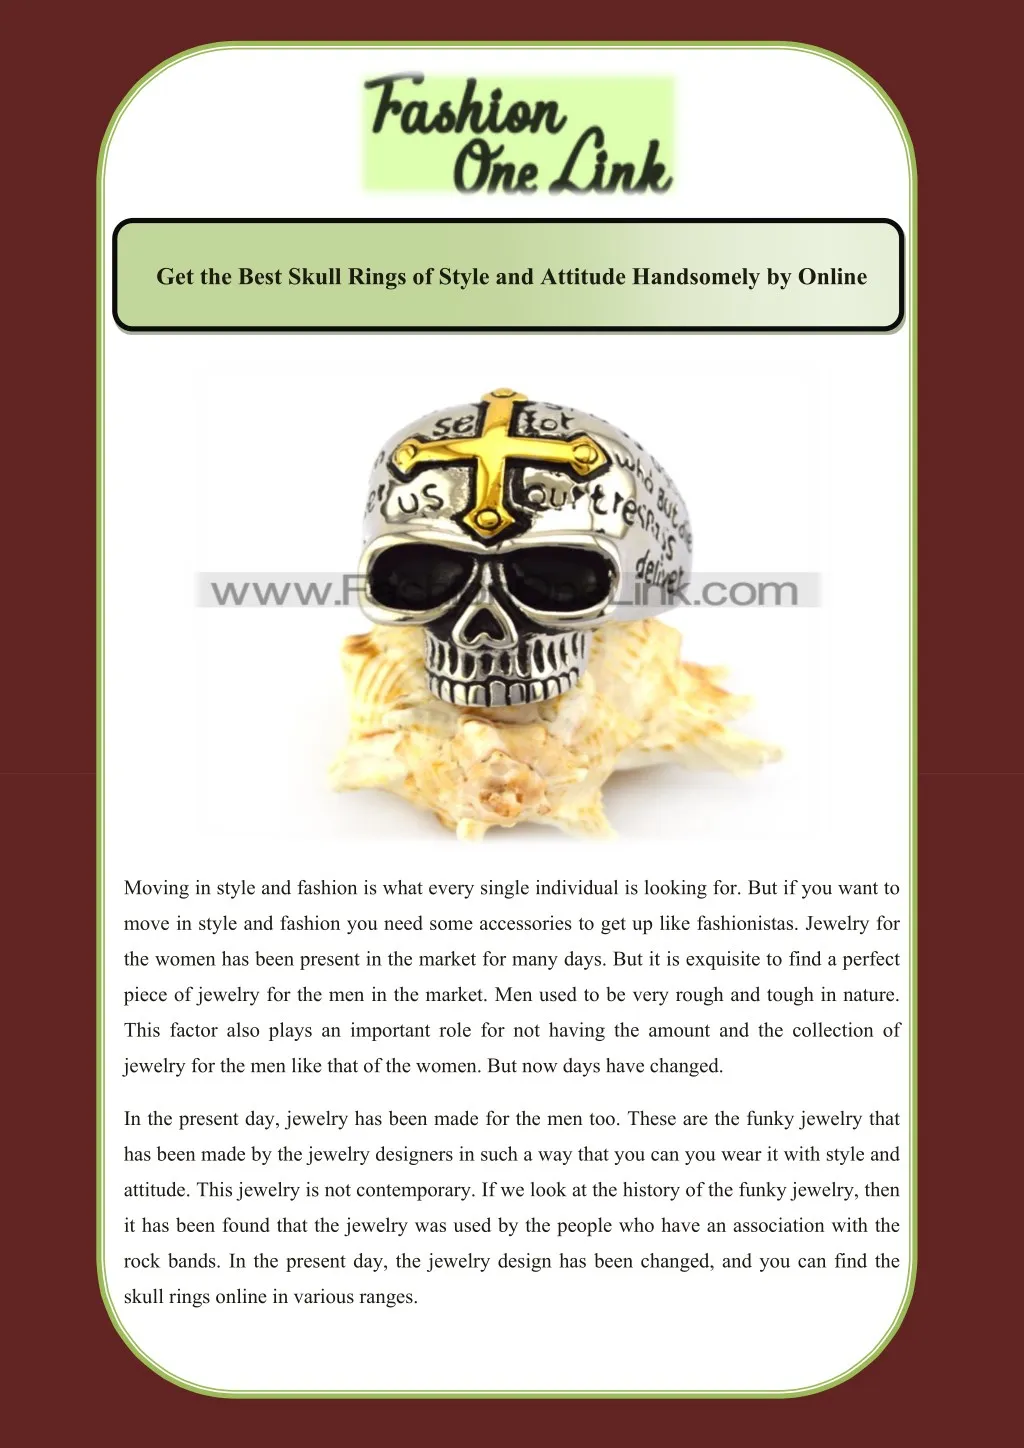 get the best skull rings of style and attitude